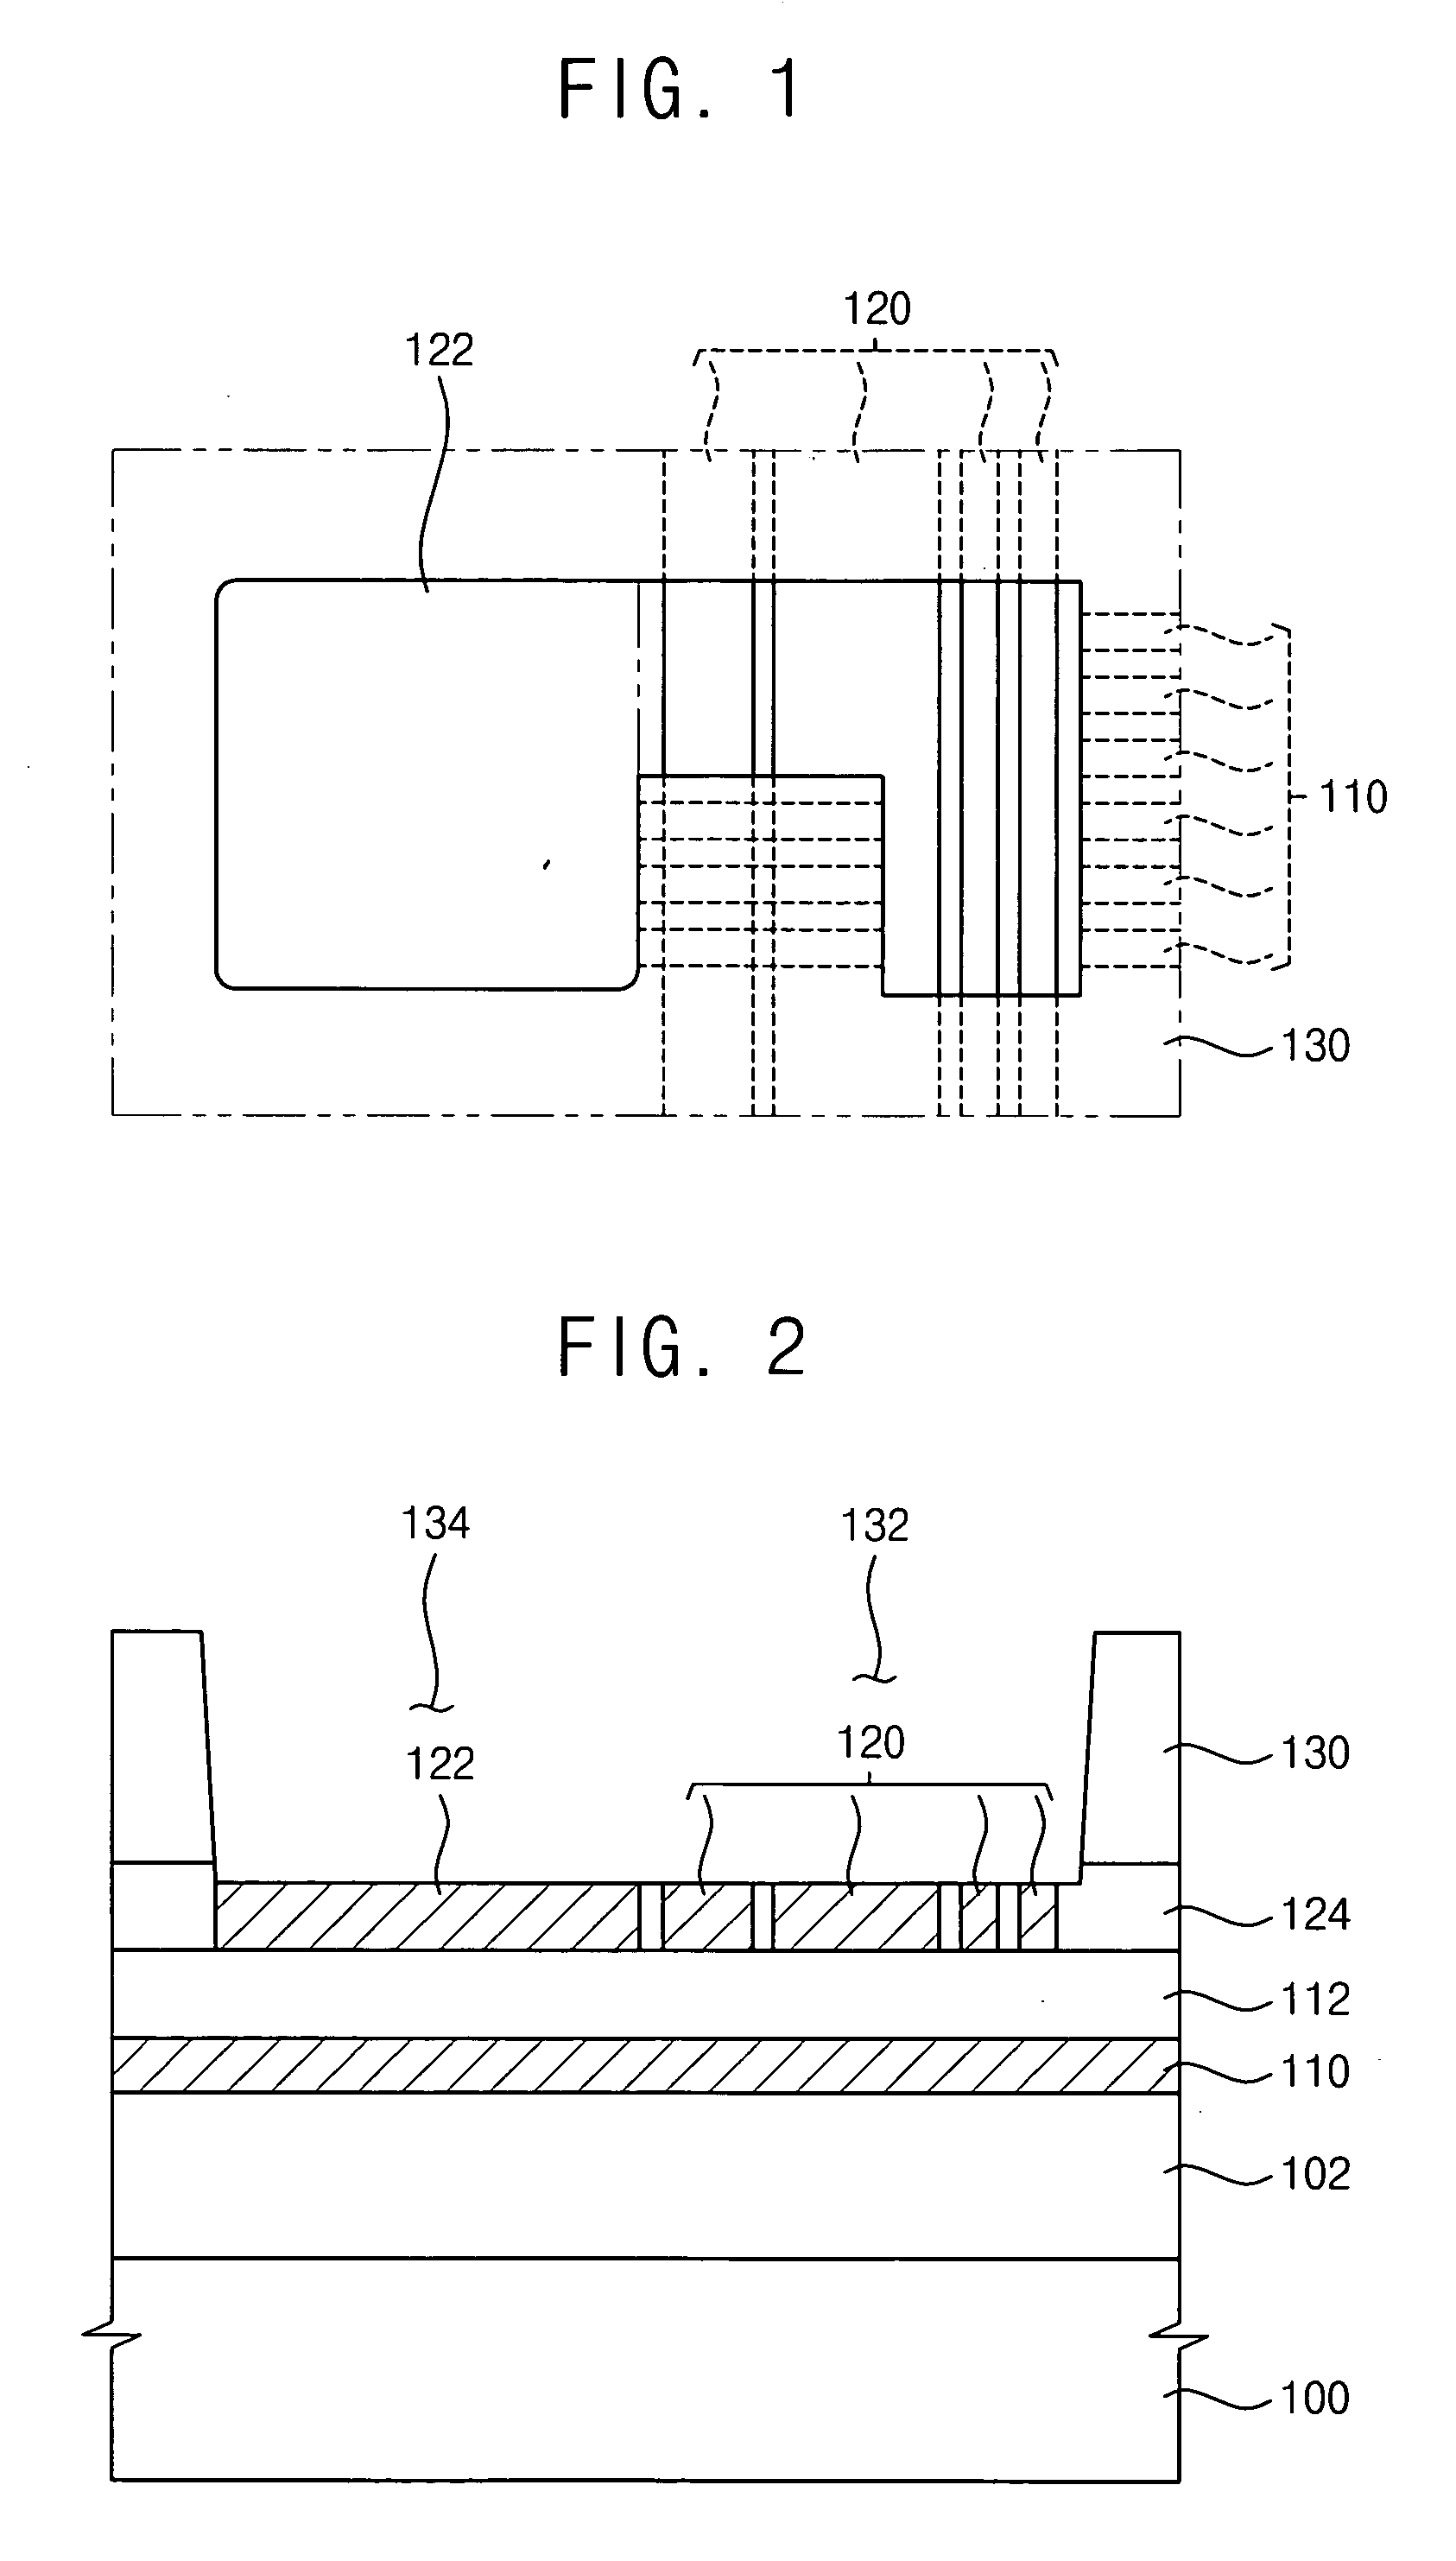 Alignment key structure in a semiconductor device and method of forming the same